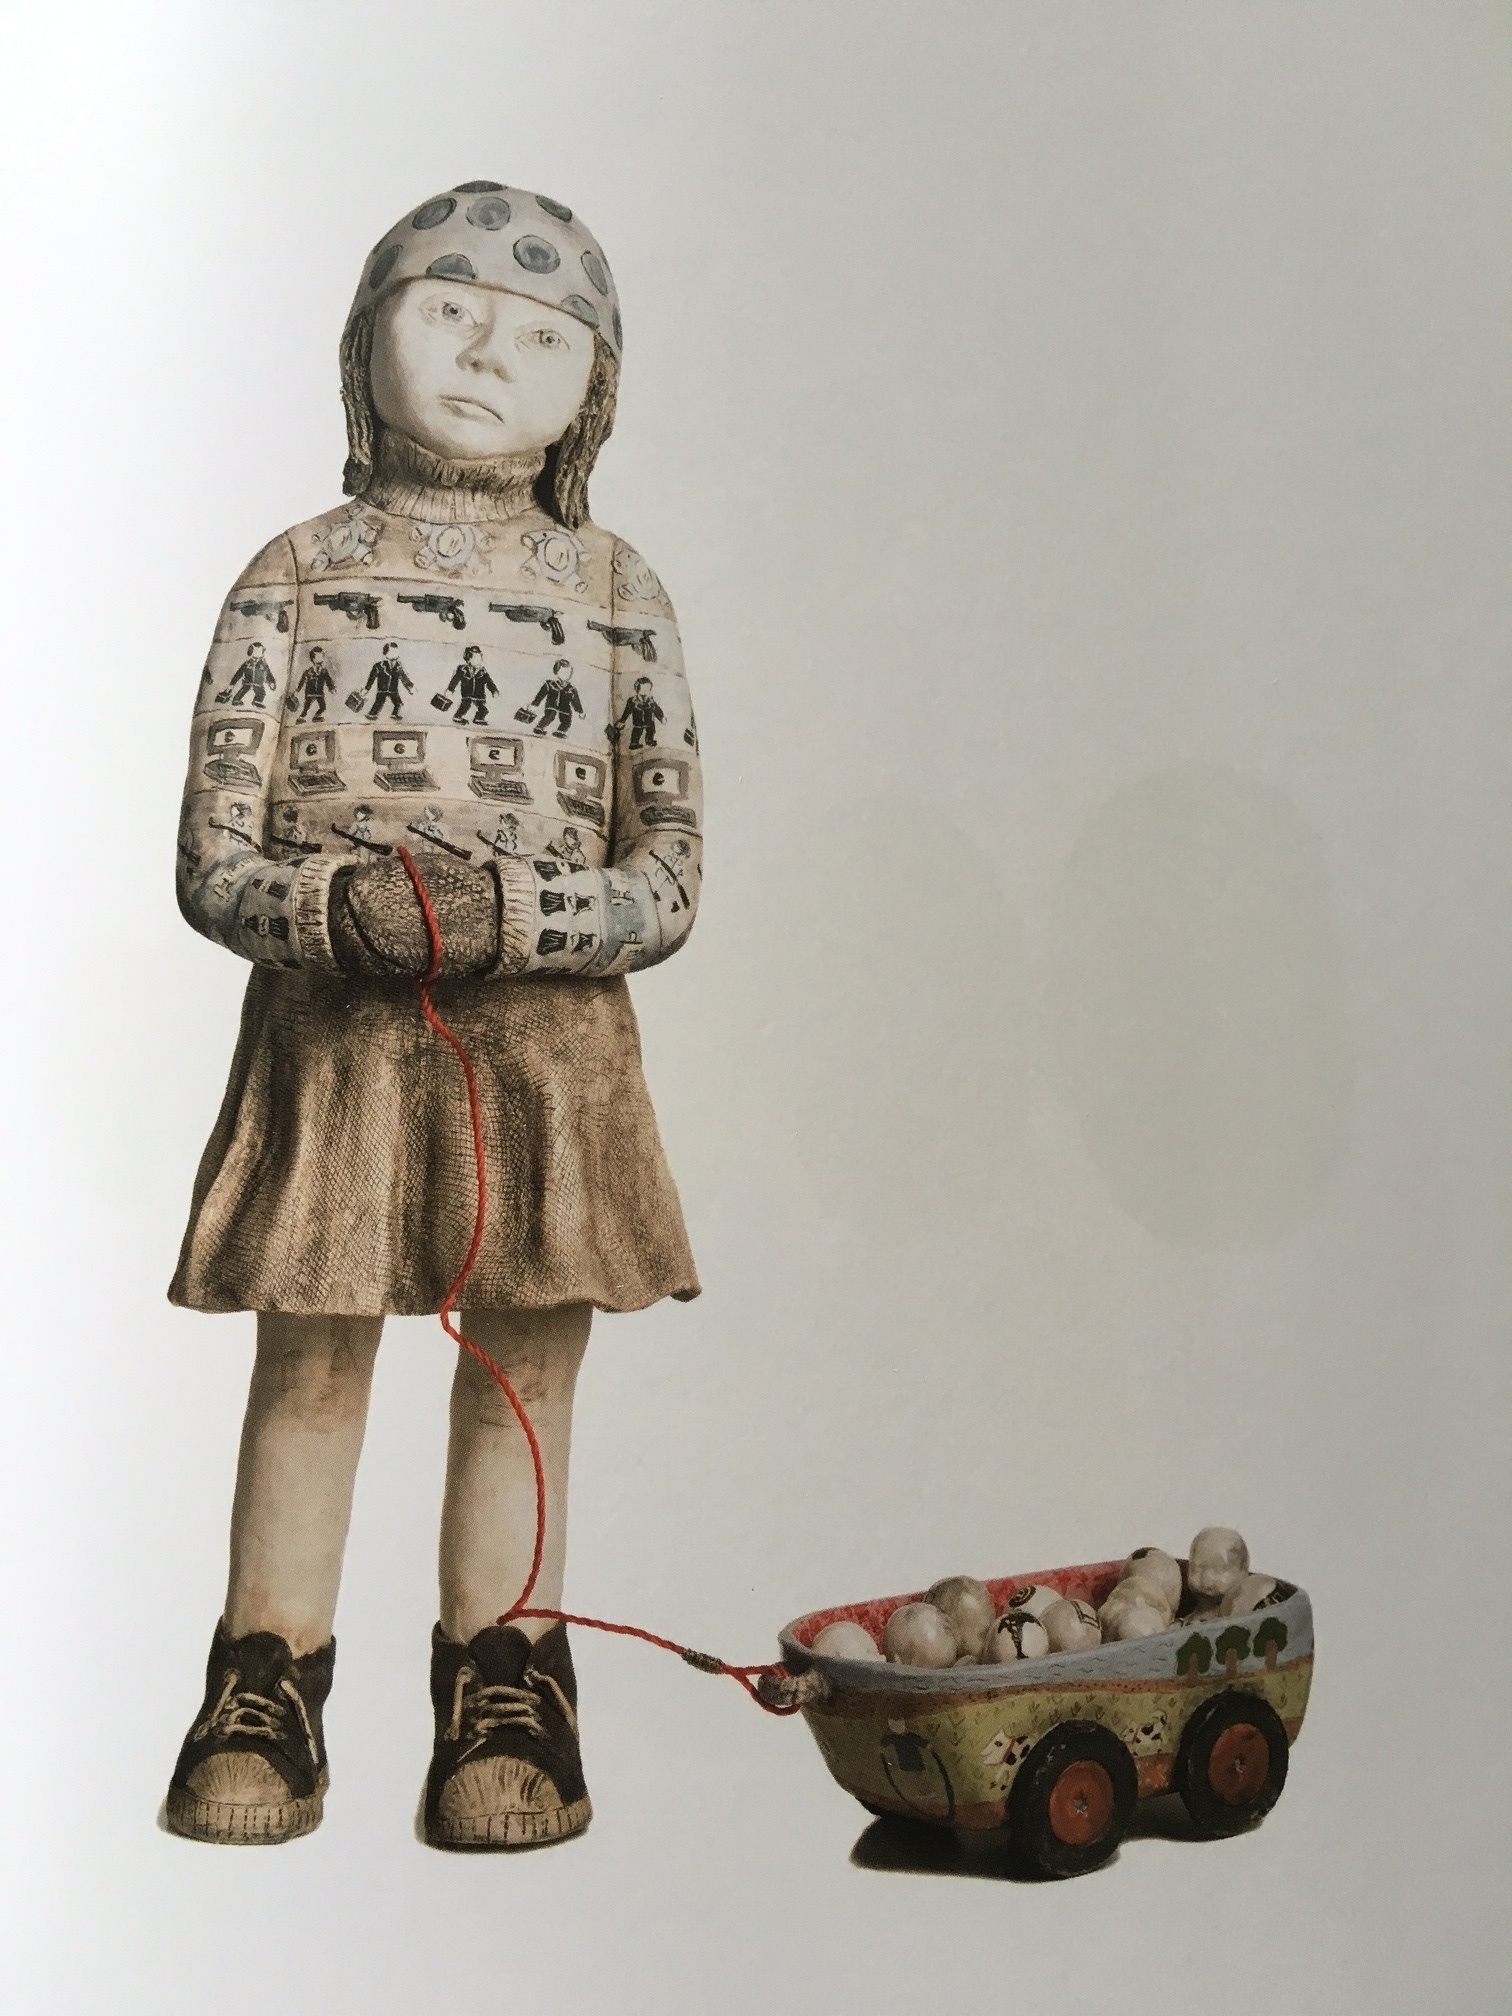 There are no bad children, only children having a bad time (Keramikmuseum Westerwald CC BY-NC-SA)